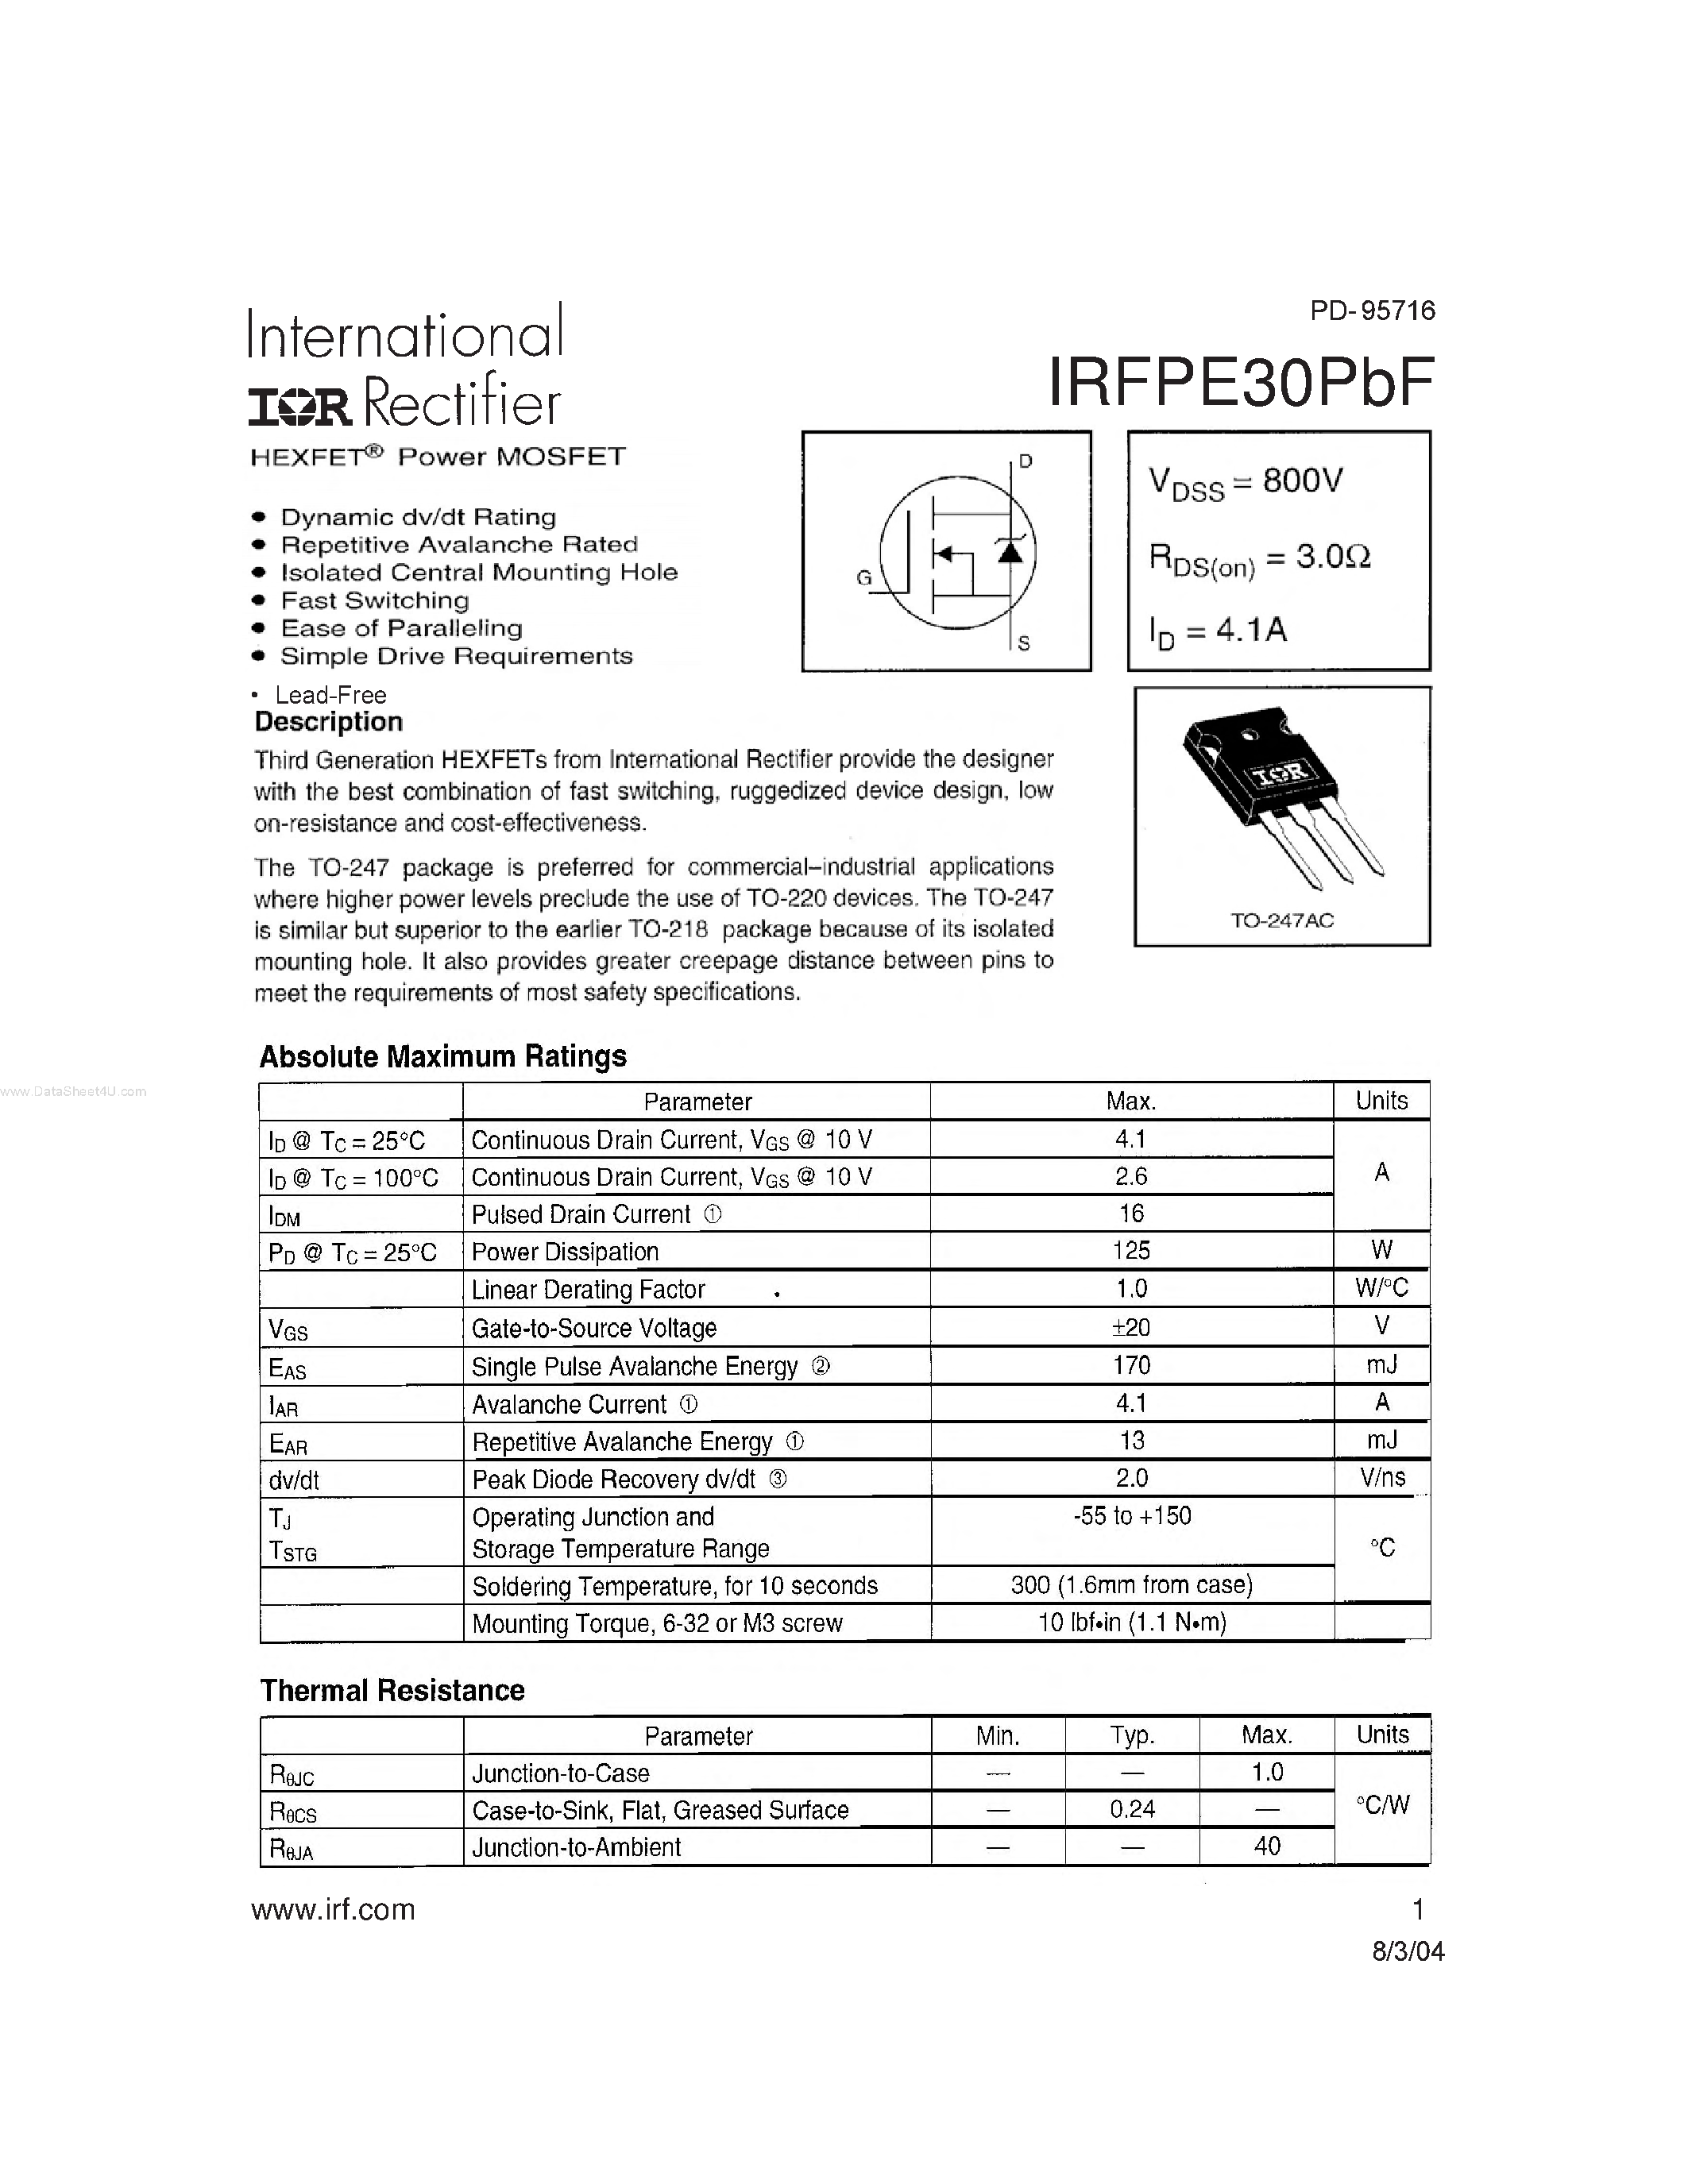 Даташит IRFPE30PBF - HEXFET Power MOSFET страница 1